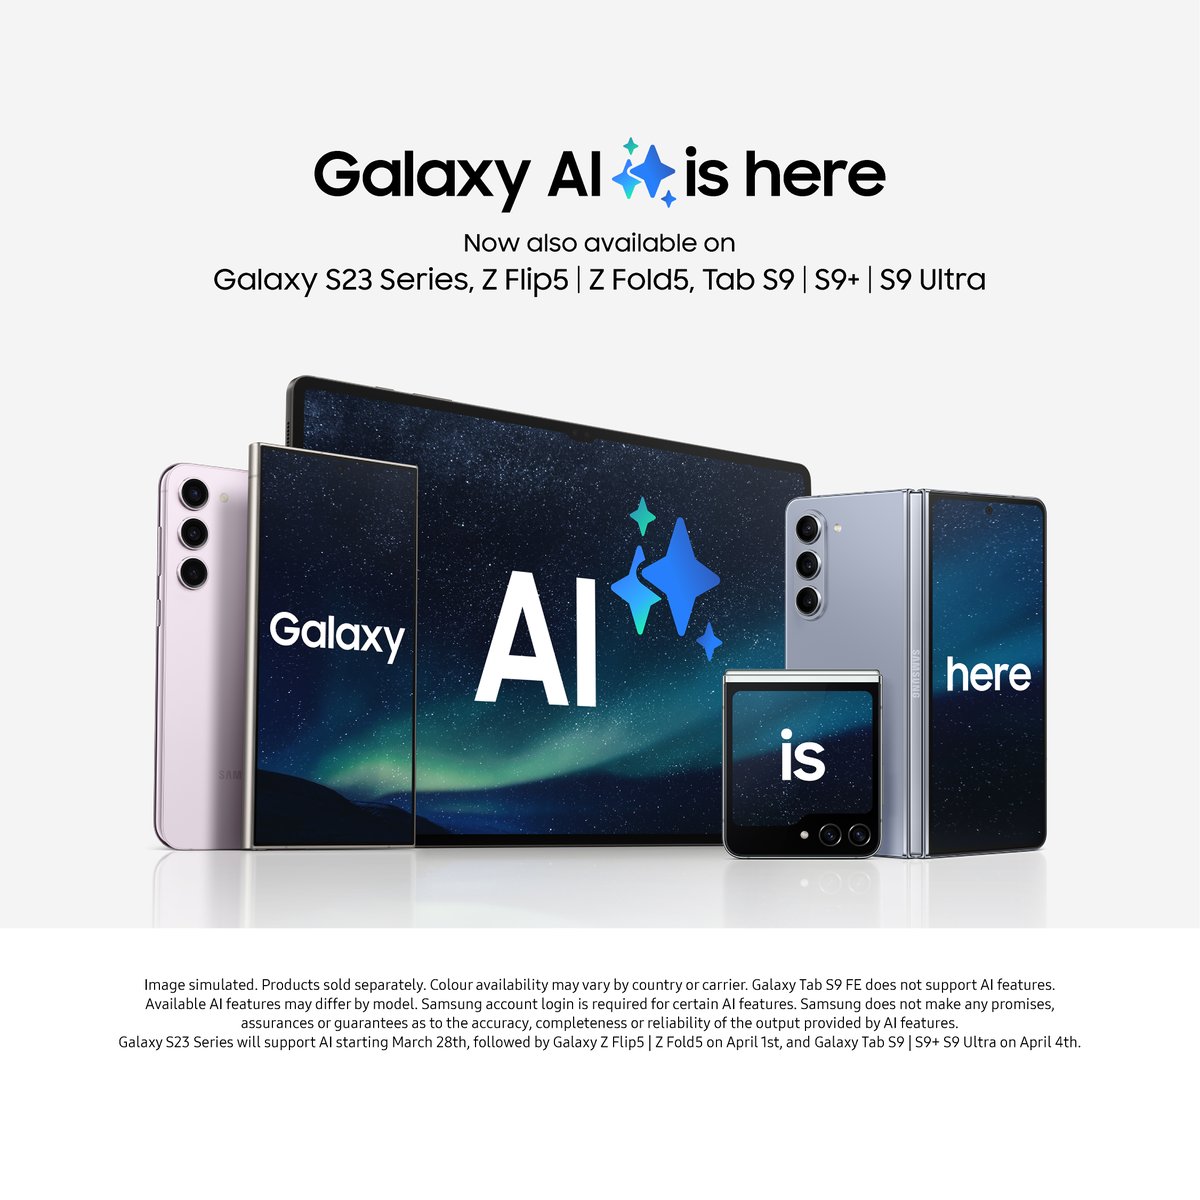 #GalaxyAI is here!
A new update to One UI 6.1 will bring Galaxy AI to the Galaxy S23 series, as well as the Galaxy Z Flip 5, Z Fold 5, Tab S9, Tab S9+, and Tab S9 Ultra allows access to features such as Circle To Search, Note Assist, Live Translator etc...

#EpicJustLikeThat